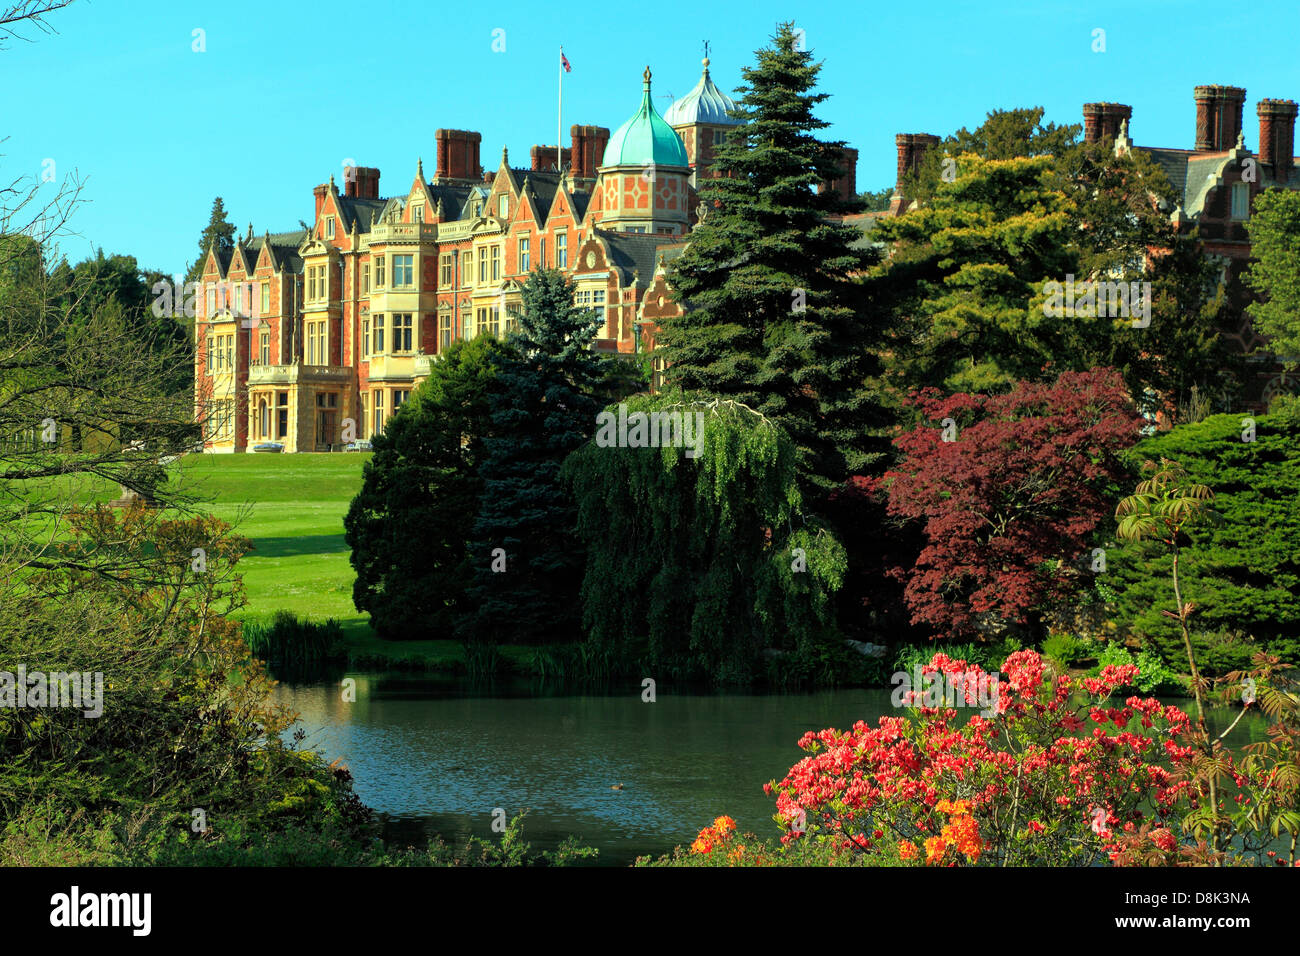 Sandringham House and Lake, Norfolk, country retreat of HM the Queen, 19th century British Victorian architecture, England UK Stock Photo